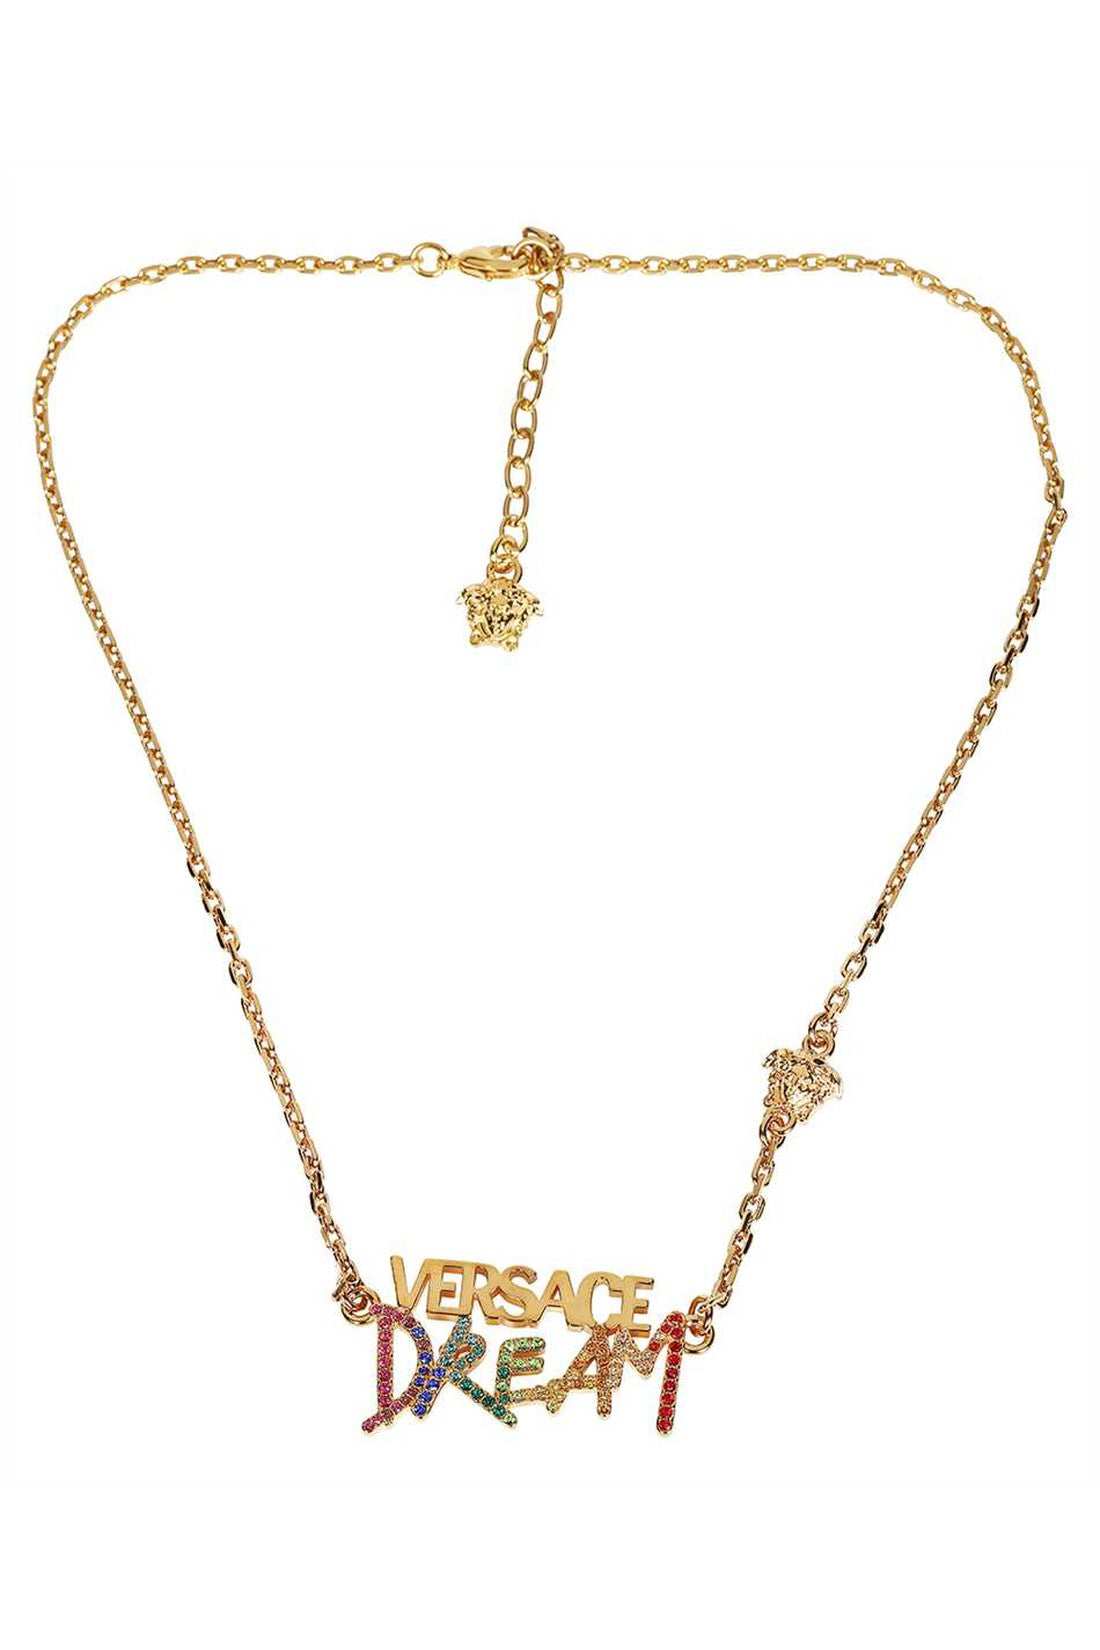 Gold-tone metal necklace